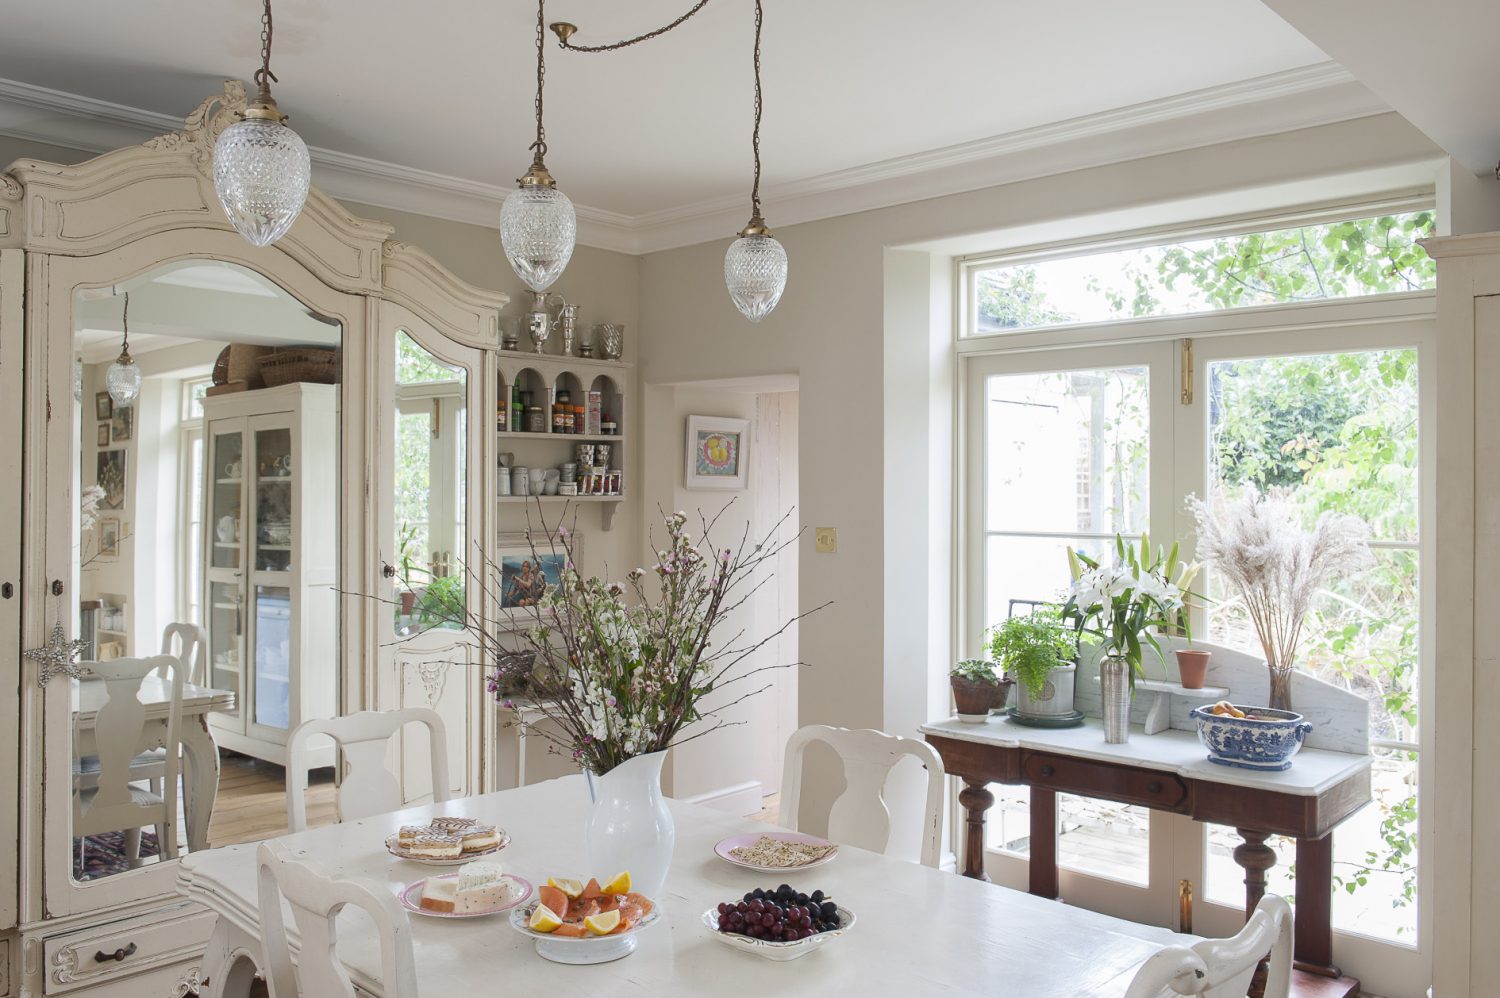 The large open-plan kitchen is a mix of French and Scandinavian style as well as being eminently practical; recycling bins are hidden under the kitchen counter and a double butler sink occupies the central island